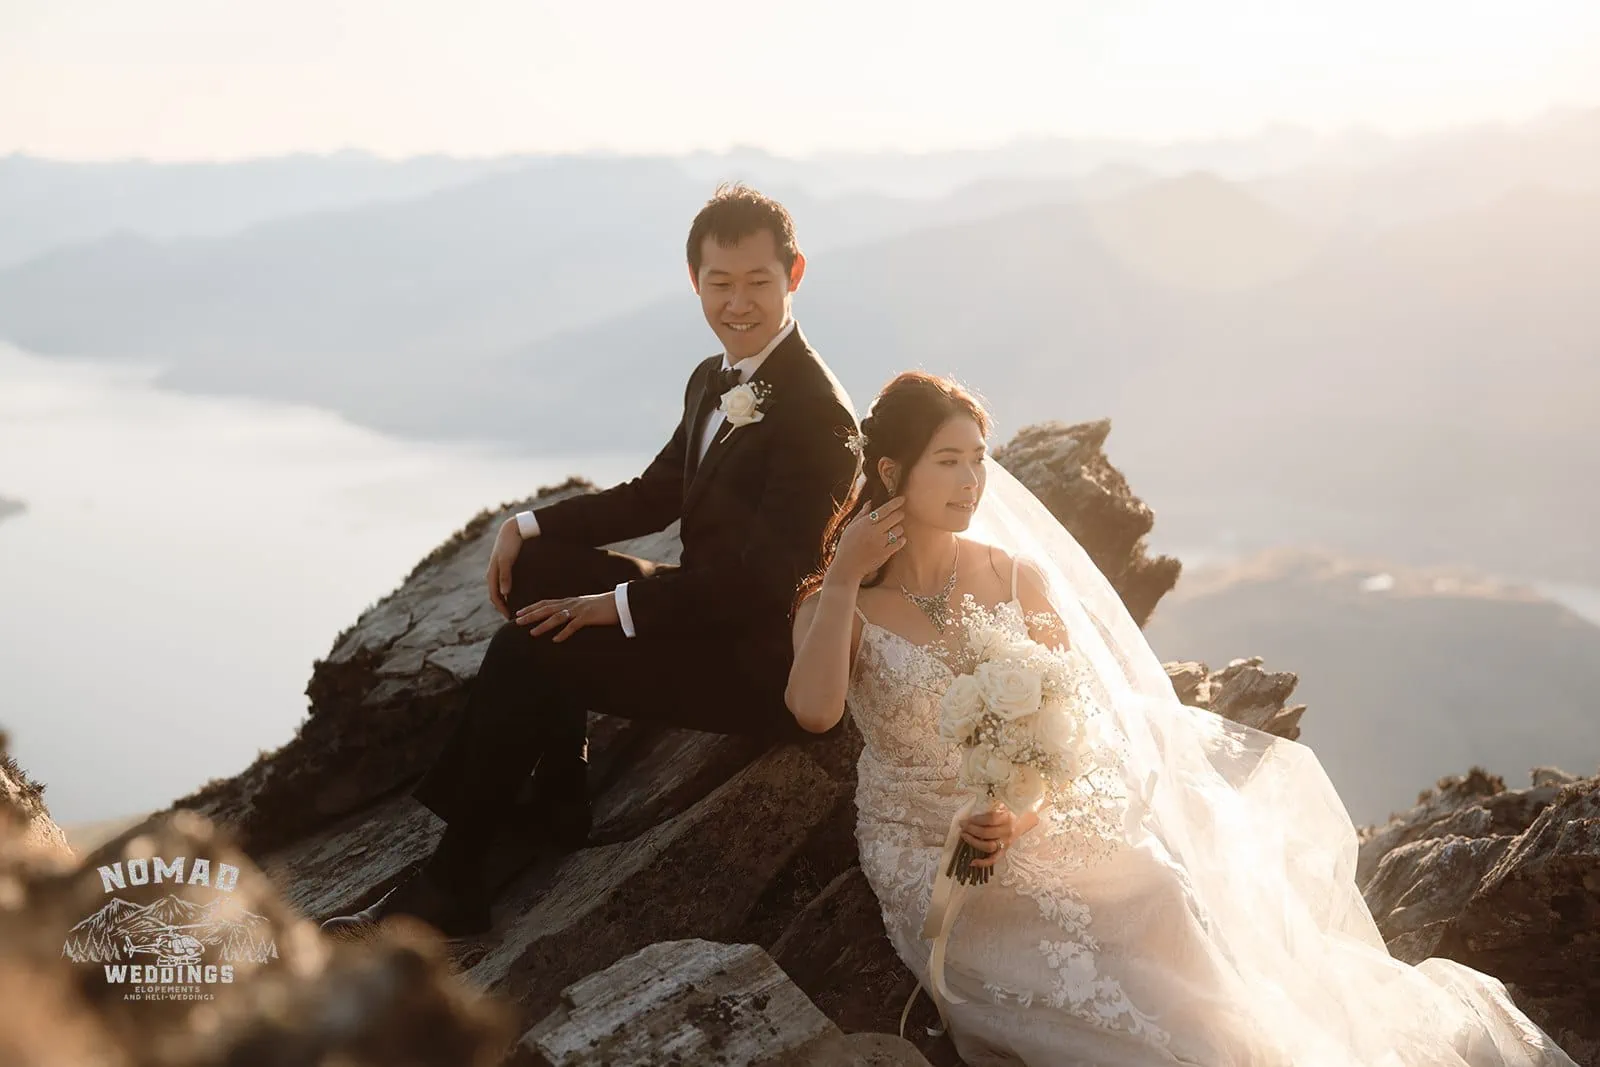 Connie and Andrew capture their "Remarkables" love story during a breathtaking Heli pre-wedding shoot on top of a mountain.